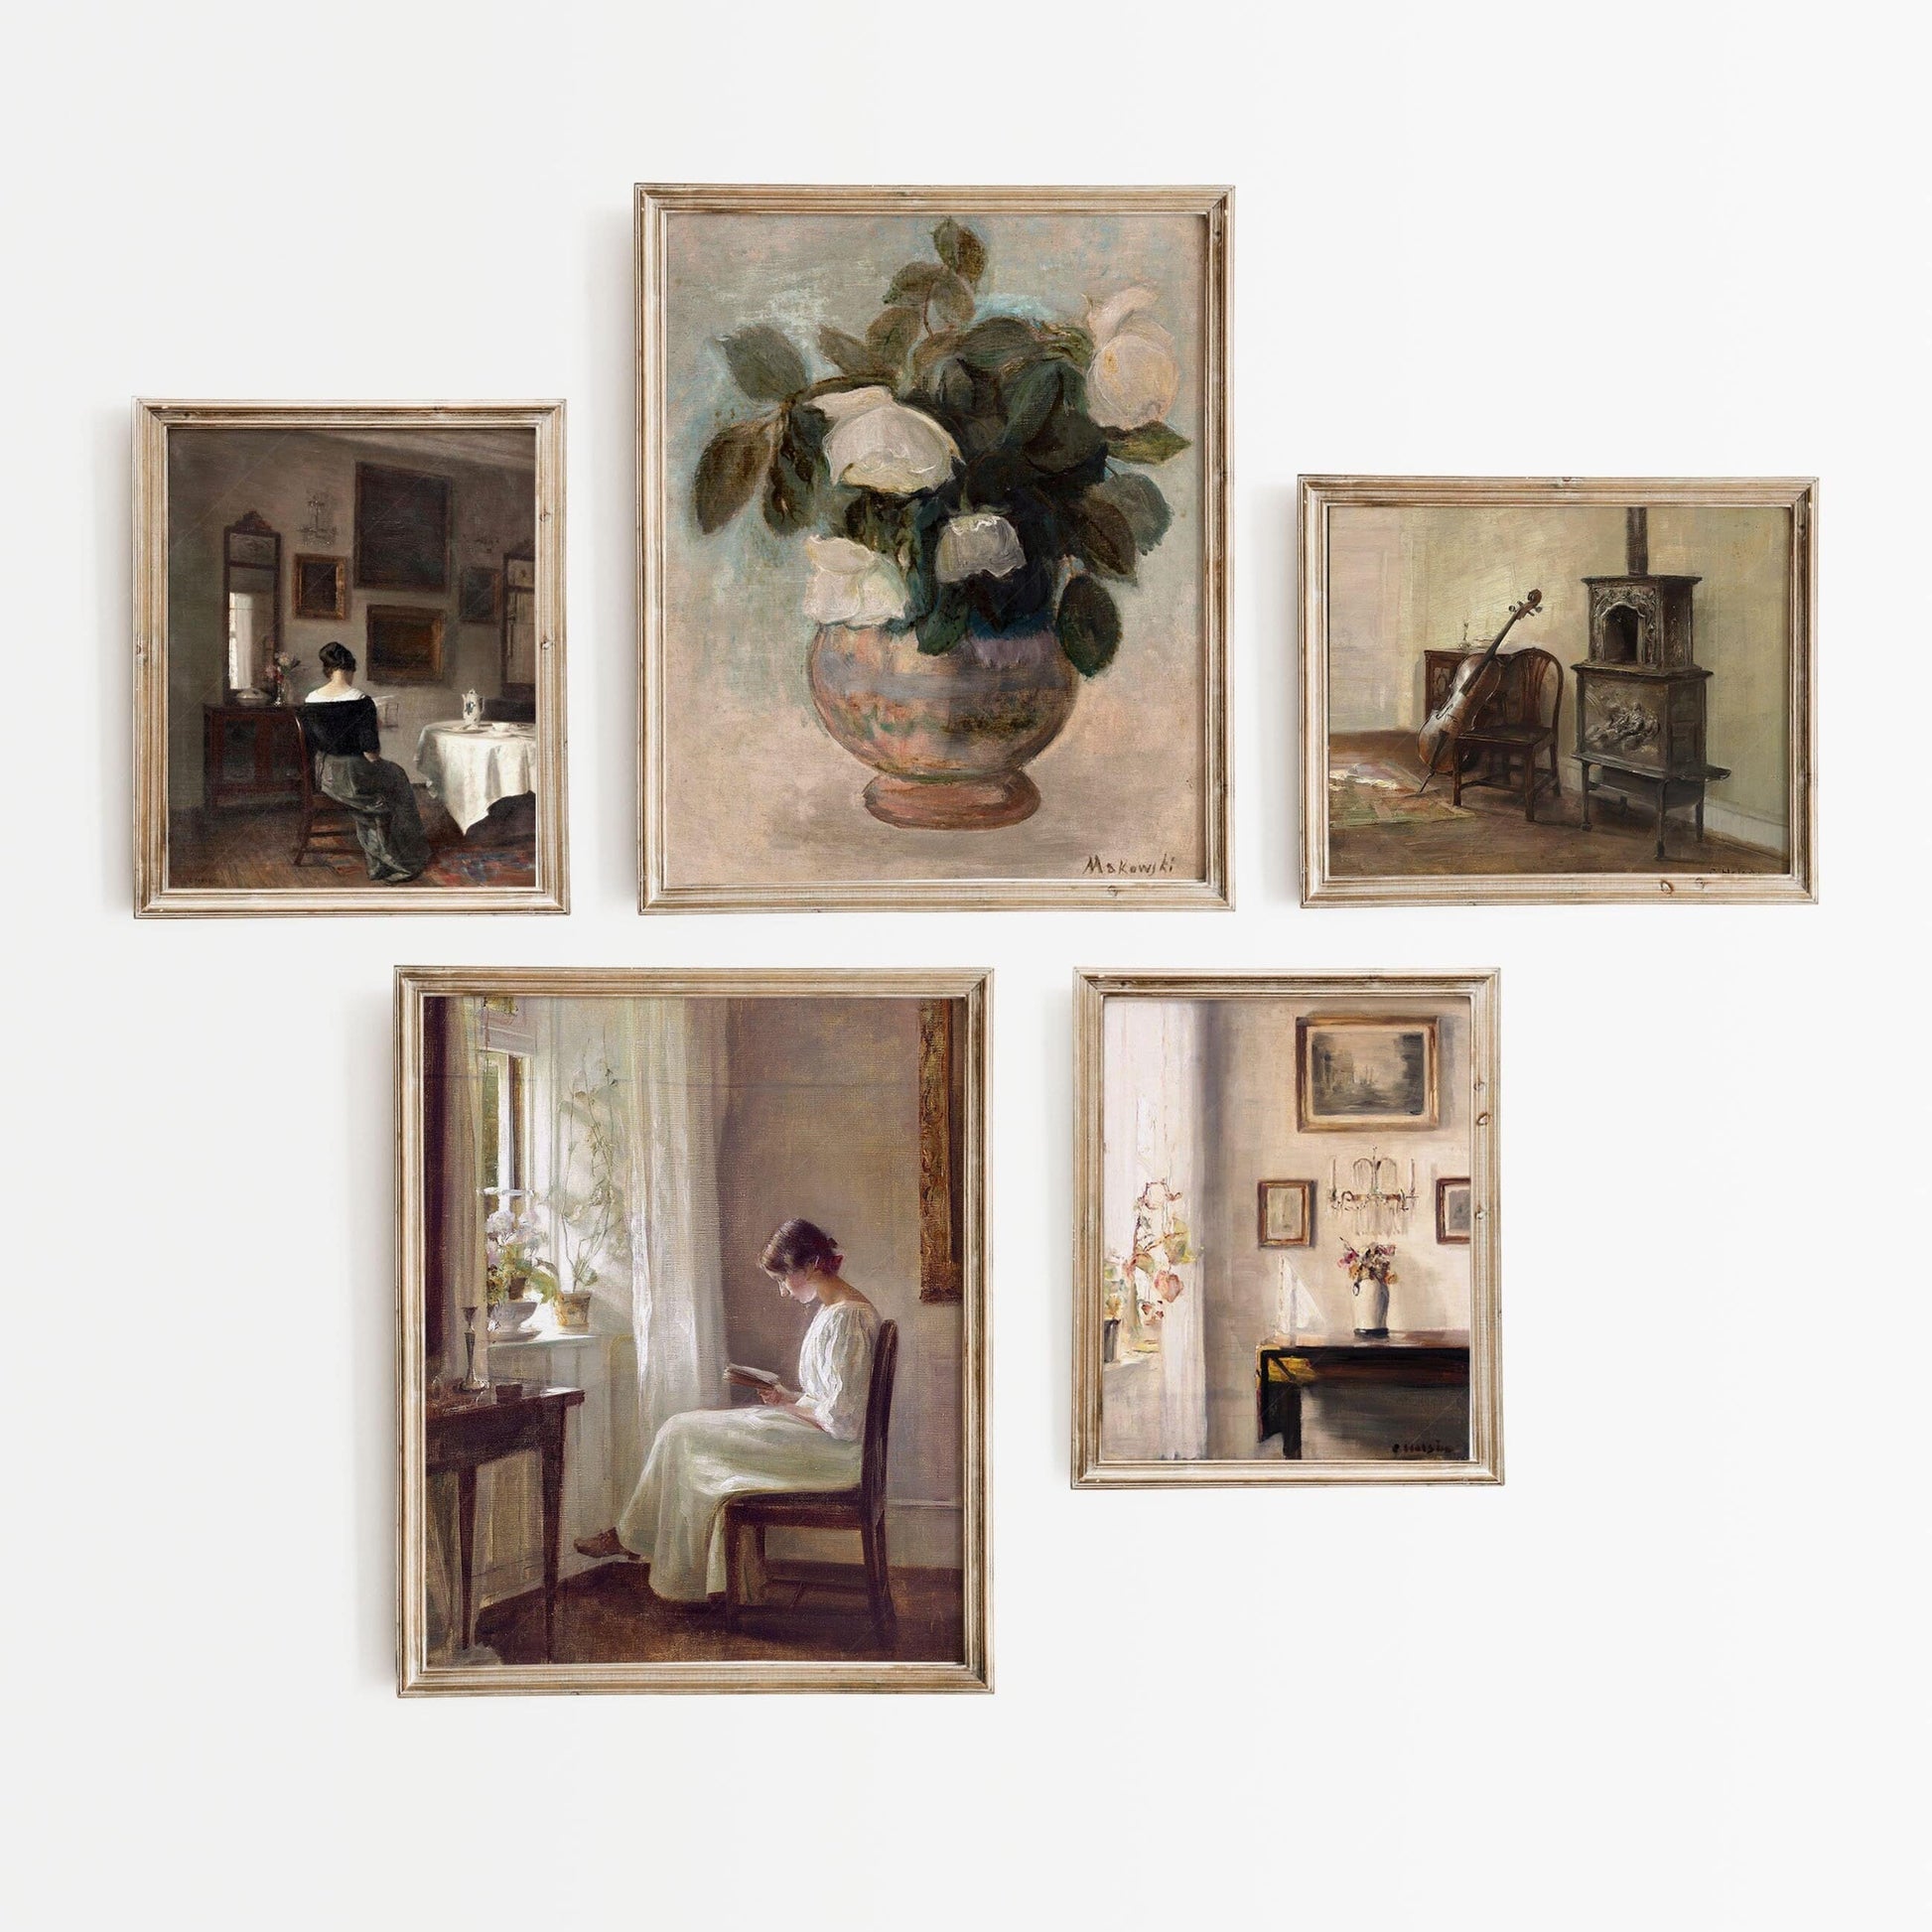 Home Poster Decor Gallery Wall Set Antique Oil Painting, Vintage Portrait, Country Art, Floral Still Life, Old House Interior, 5 Prints Included, 3 in 8 x10", 2 in 11x 14"